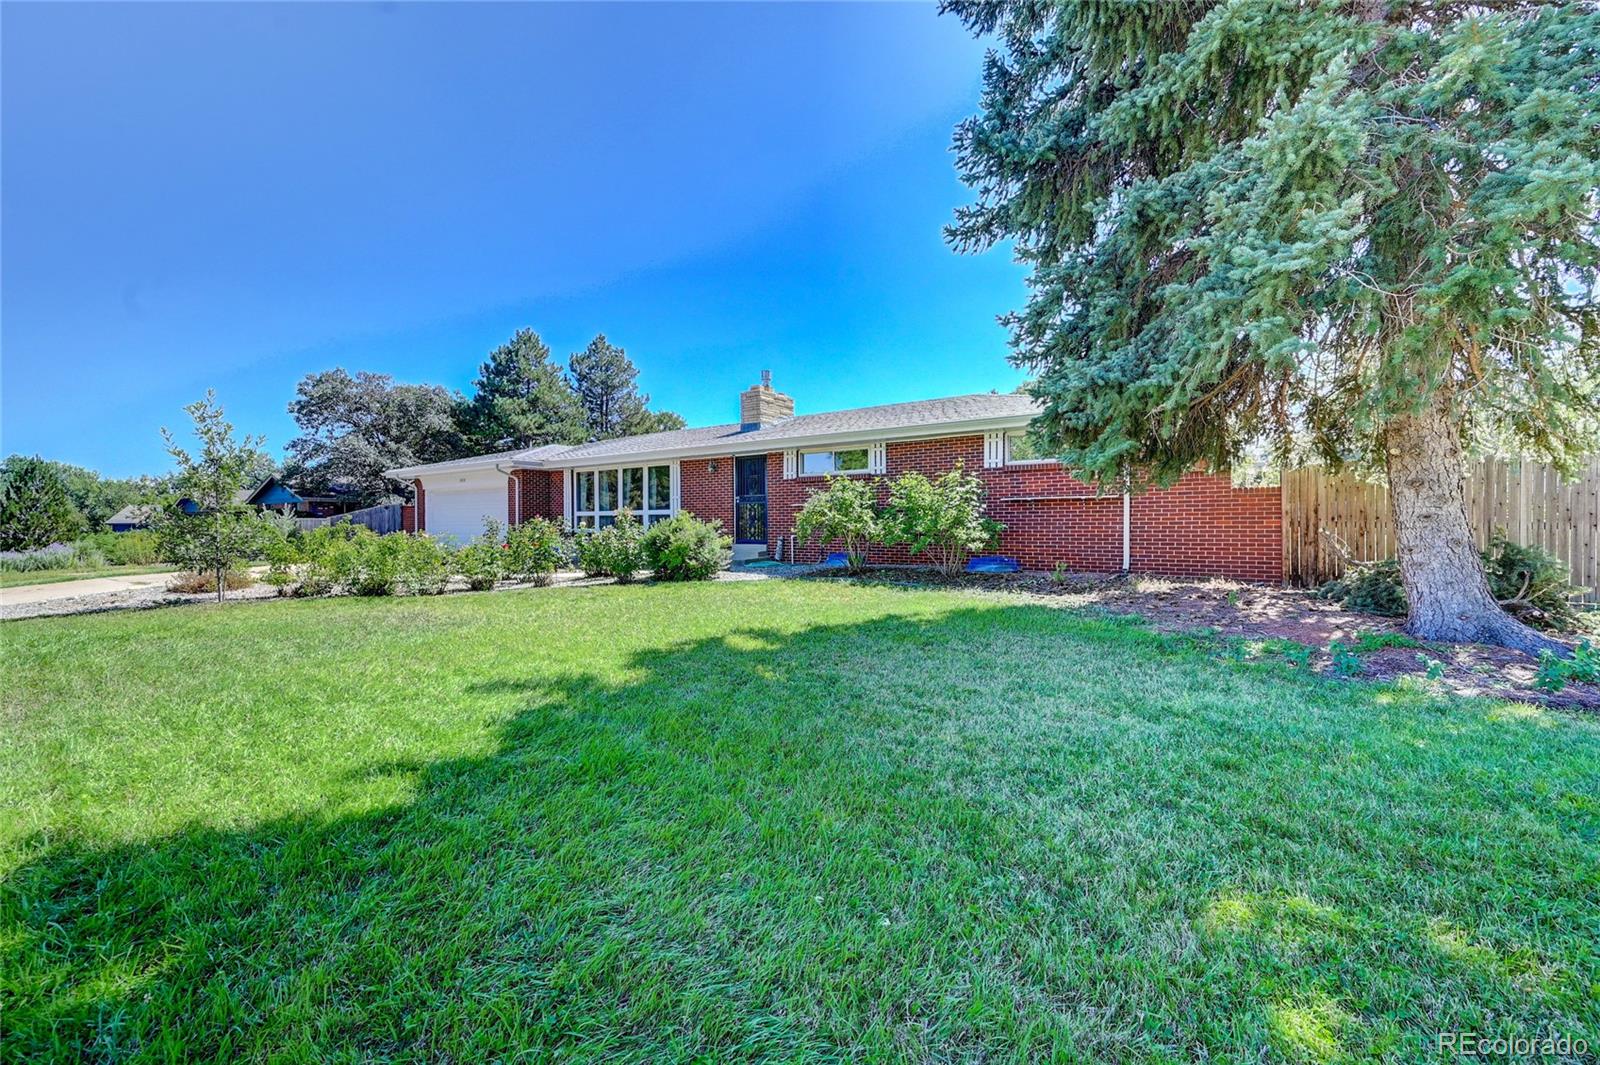 11038 w 82nd place, arvada sold home. Closed on 2023-10-30 for $629,000.